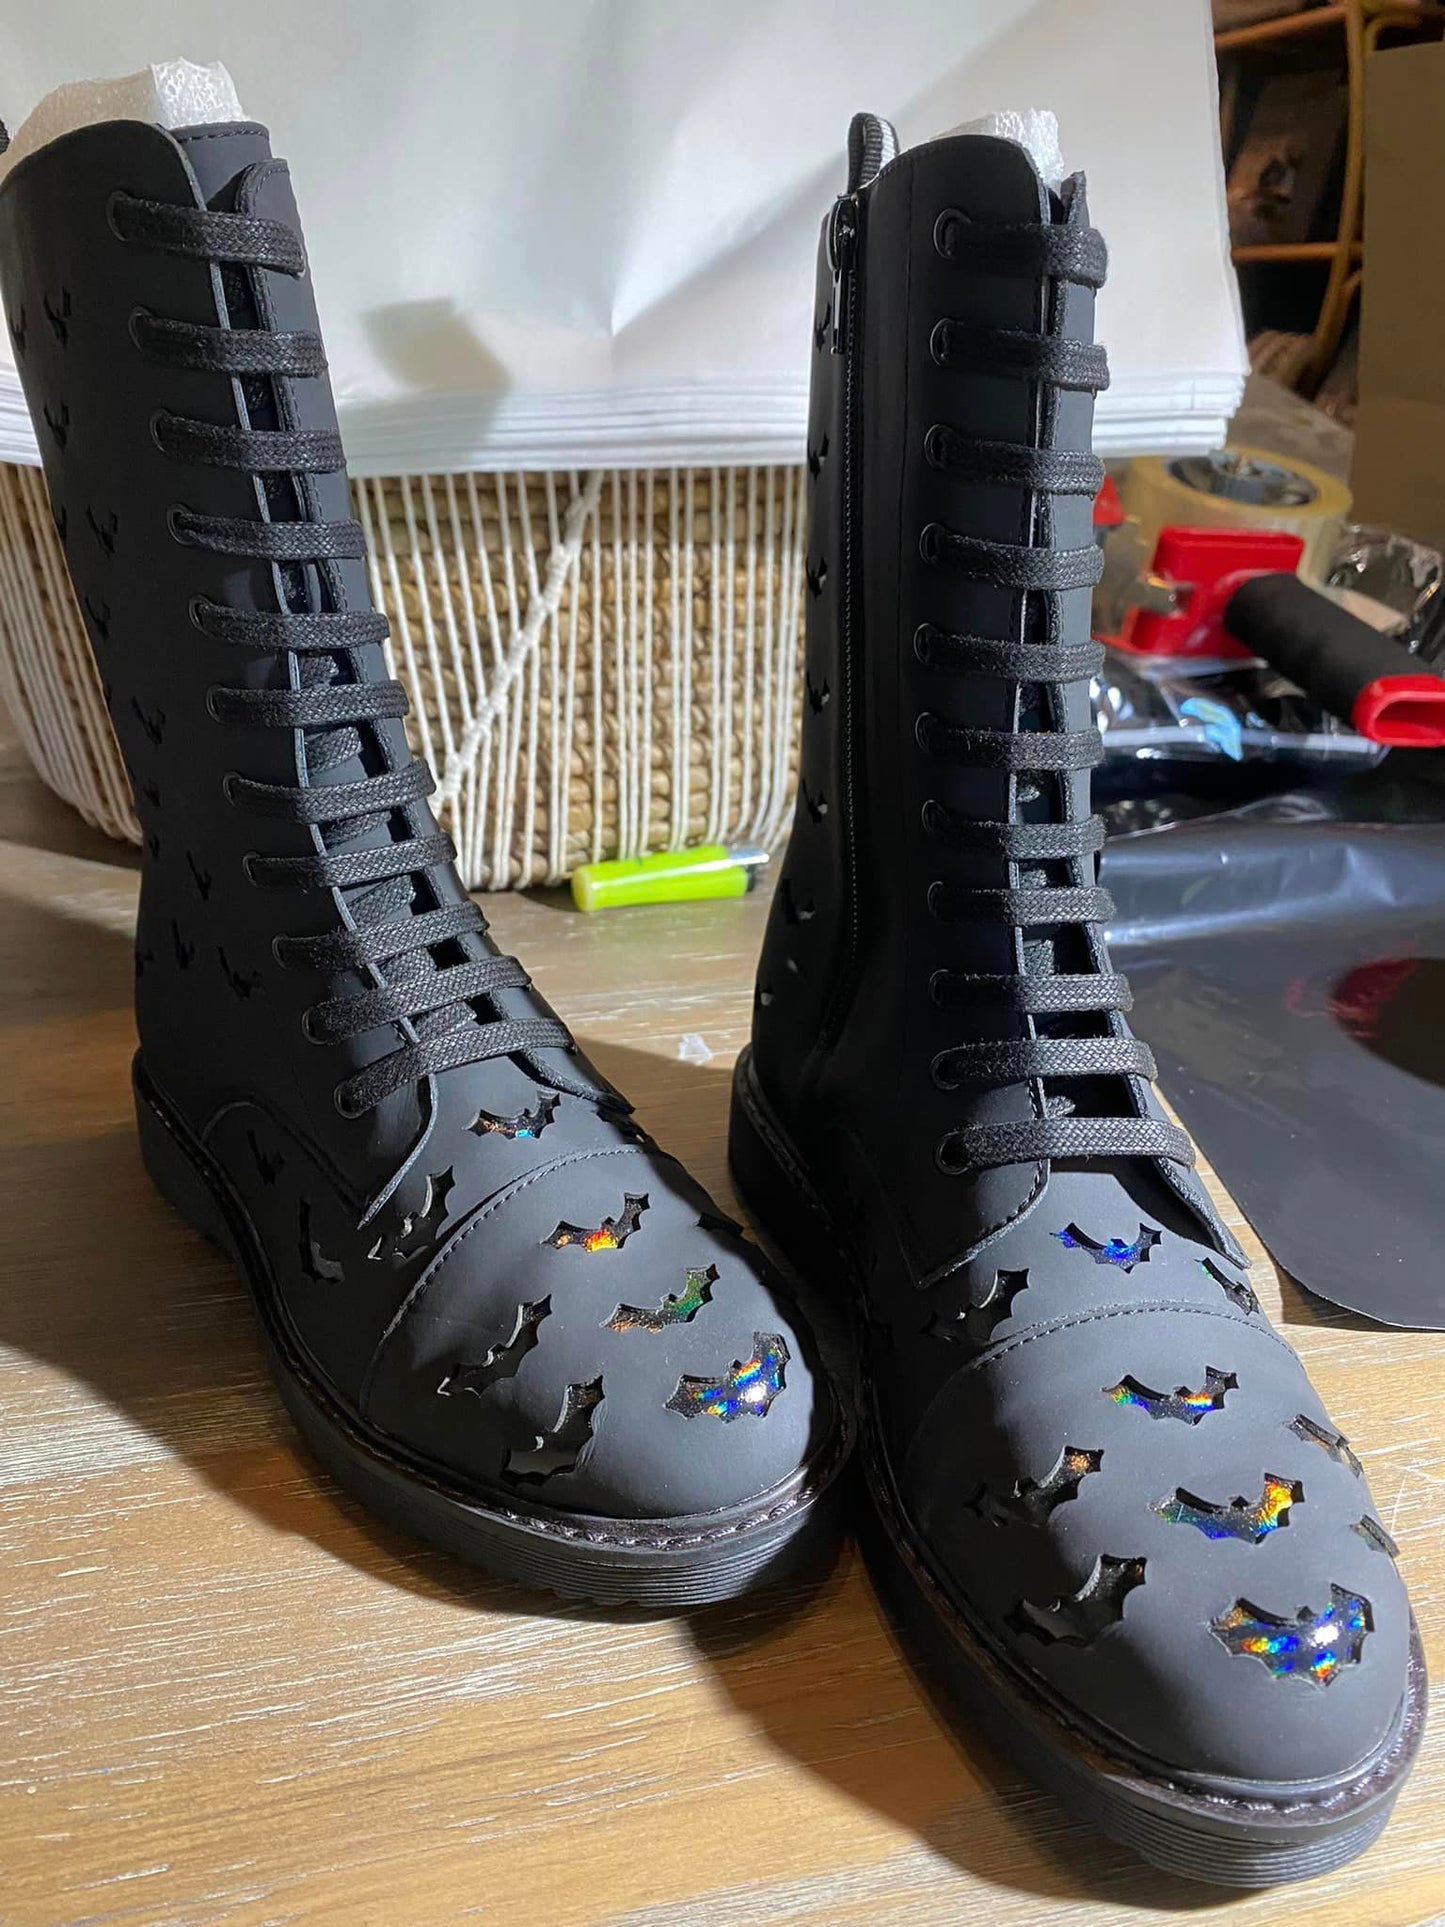 UPGRADE: MAKE MY BOOTS TALL LIKE THE TIKTOK! ISA HEIGHT. (ADDS EXTRA HEIGHT TO COMBATS)